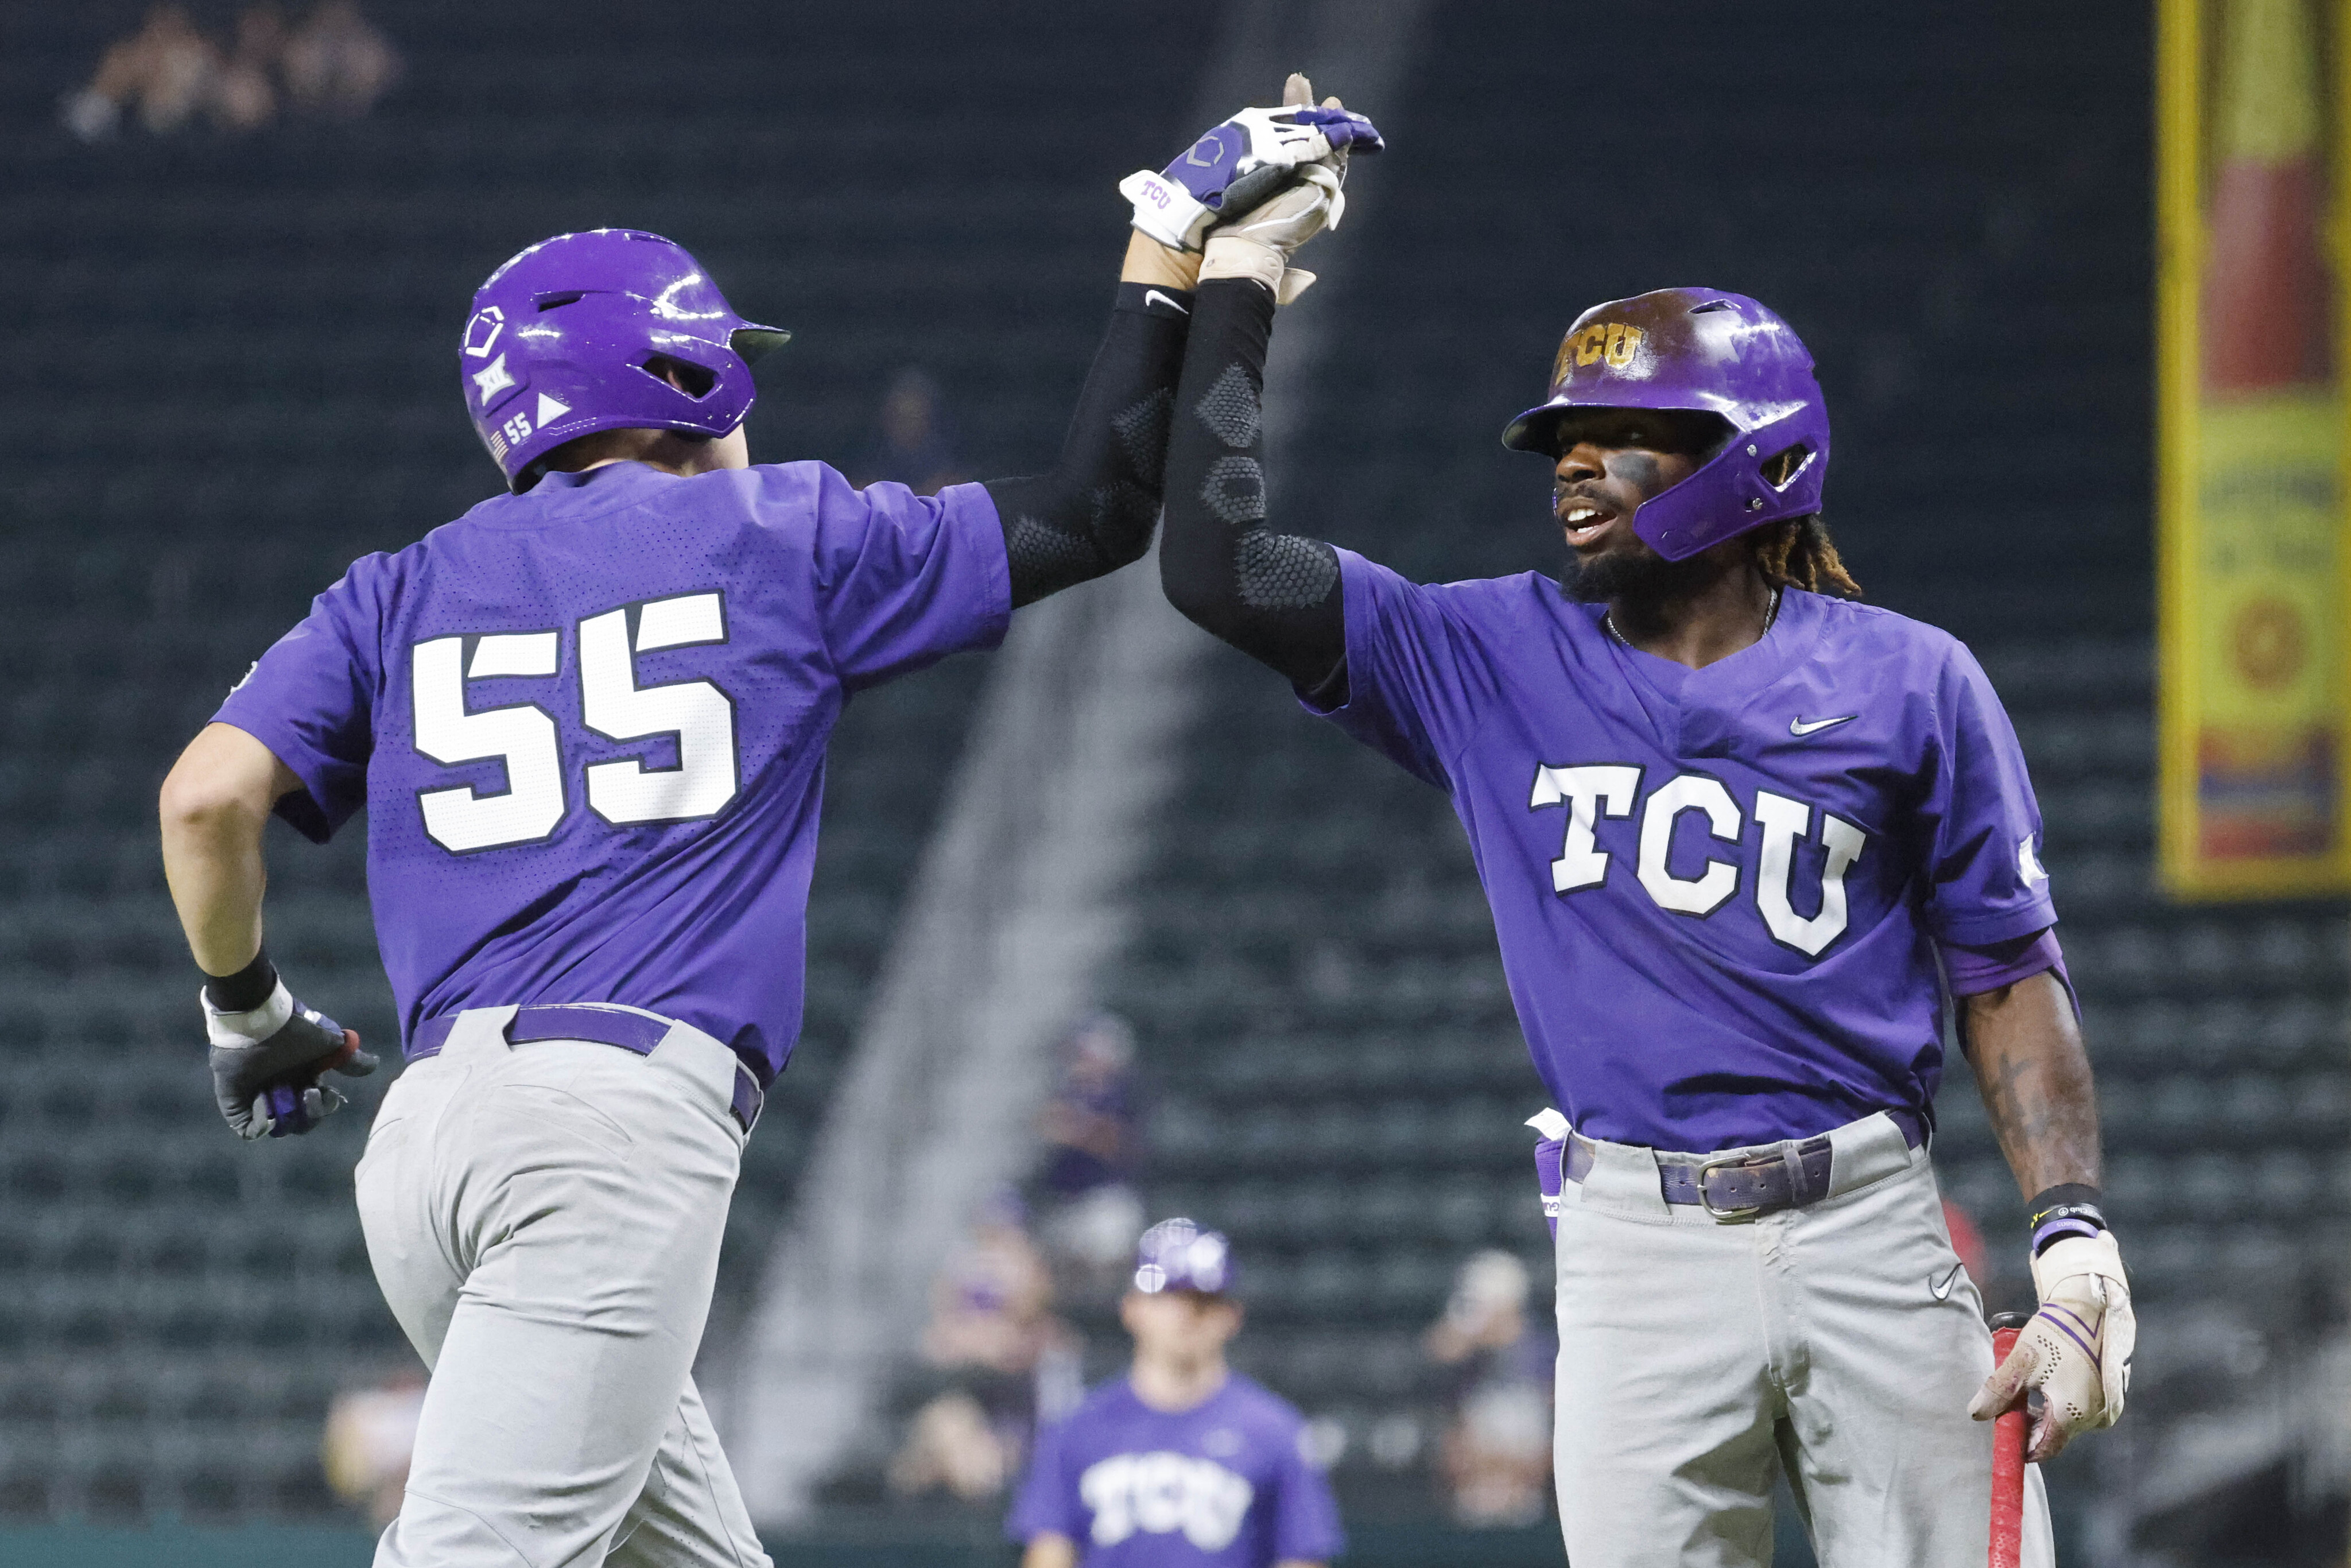 Two Texas baseball teams still vying for an NCAA College World